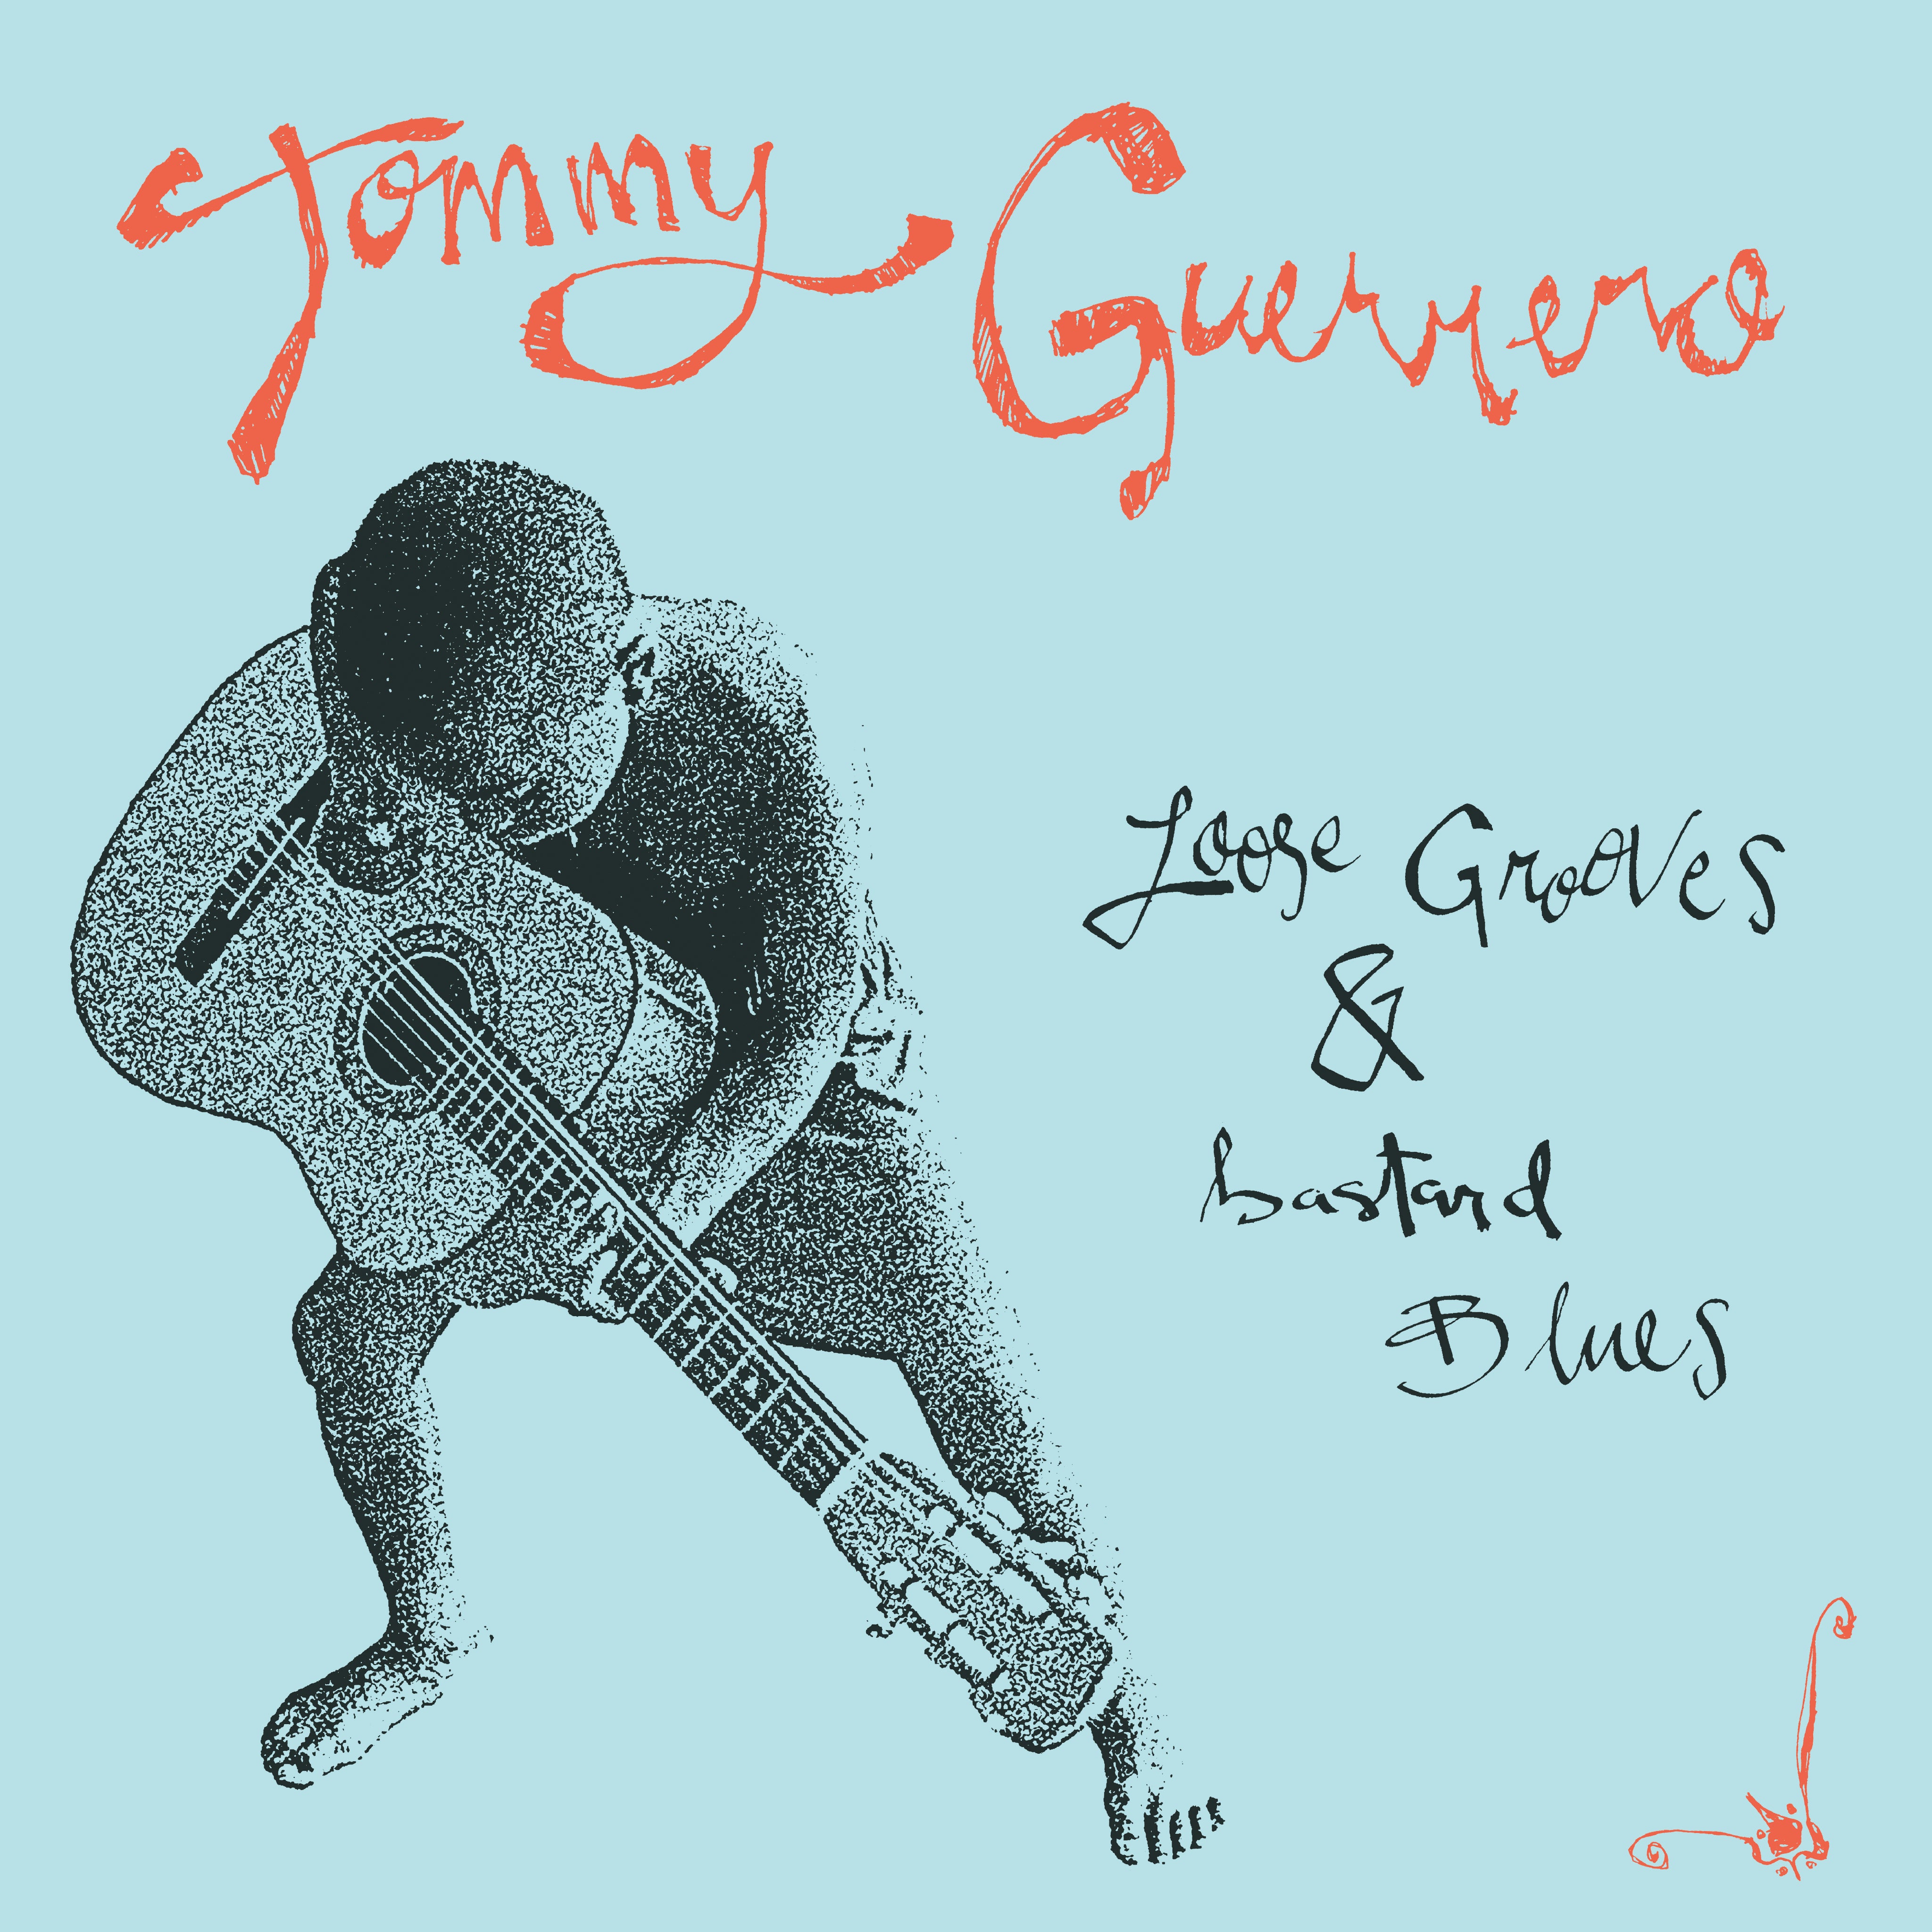 Tommy Guerrero – Loose Grooves & Bastard Blues